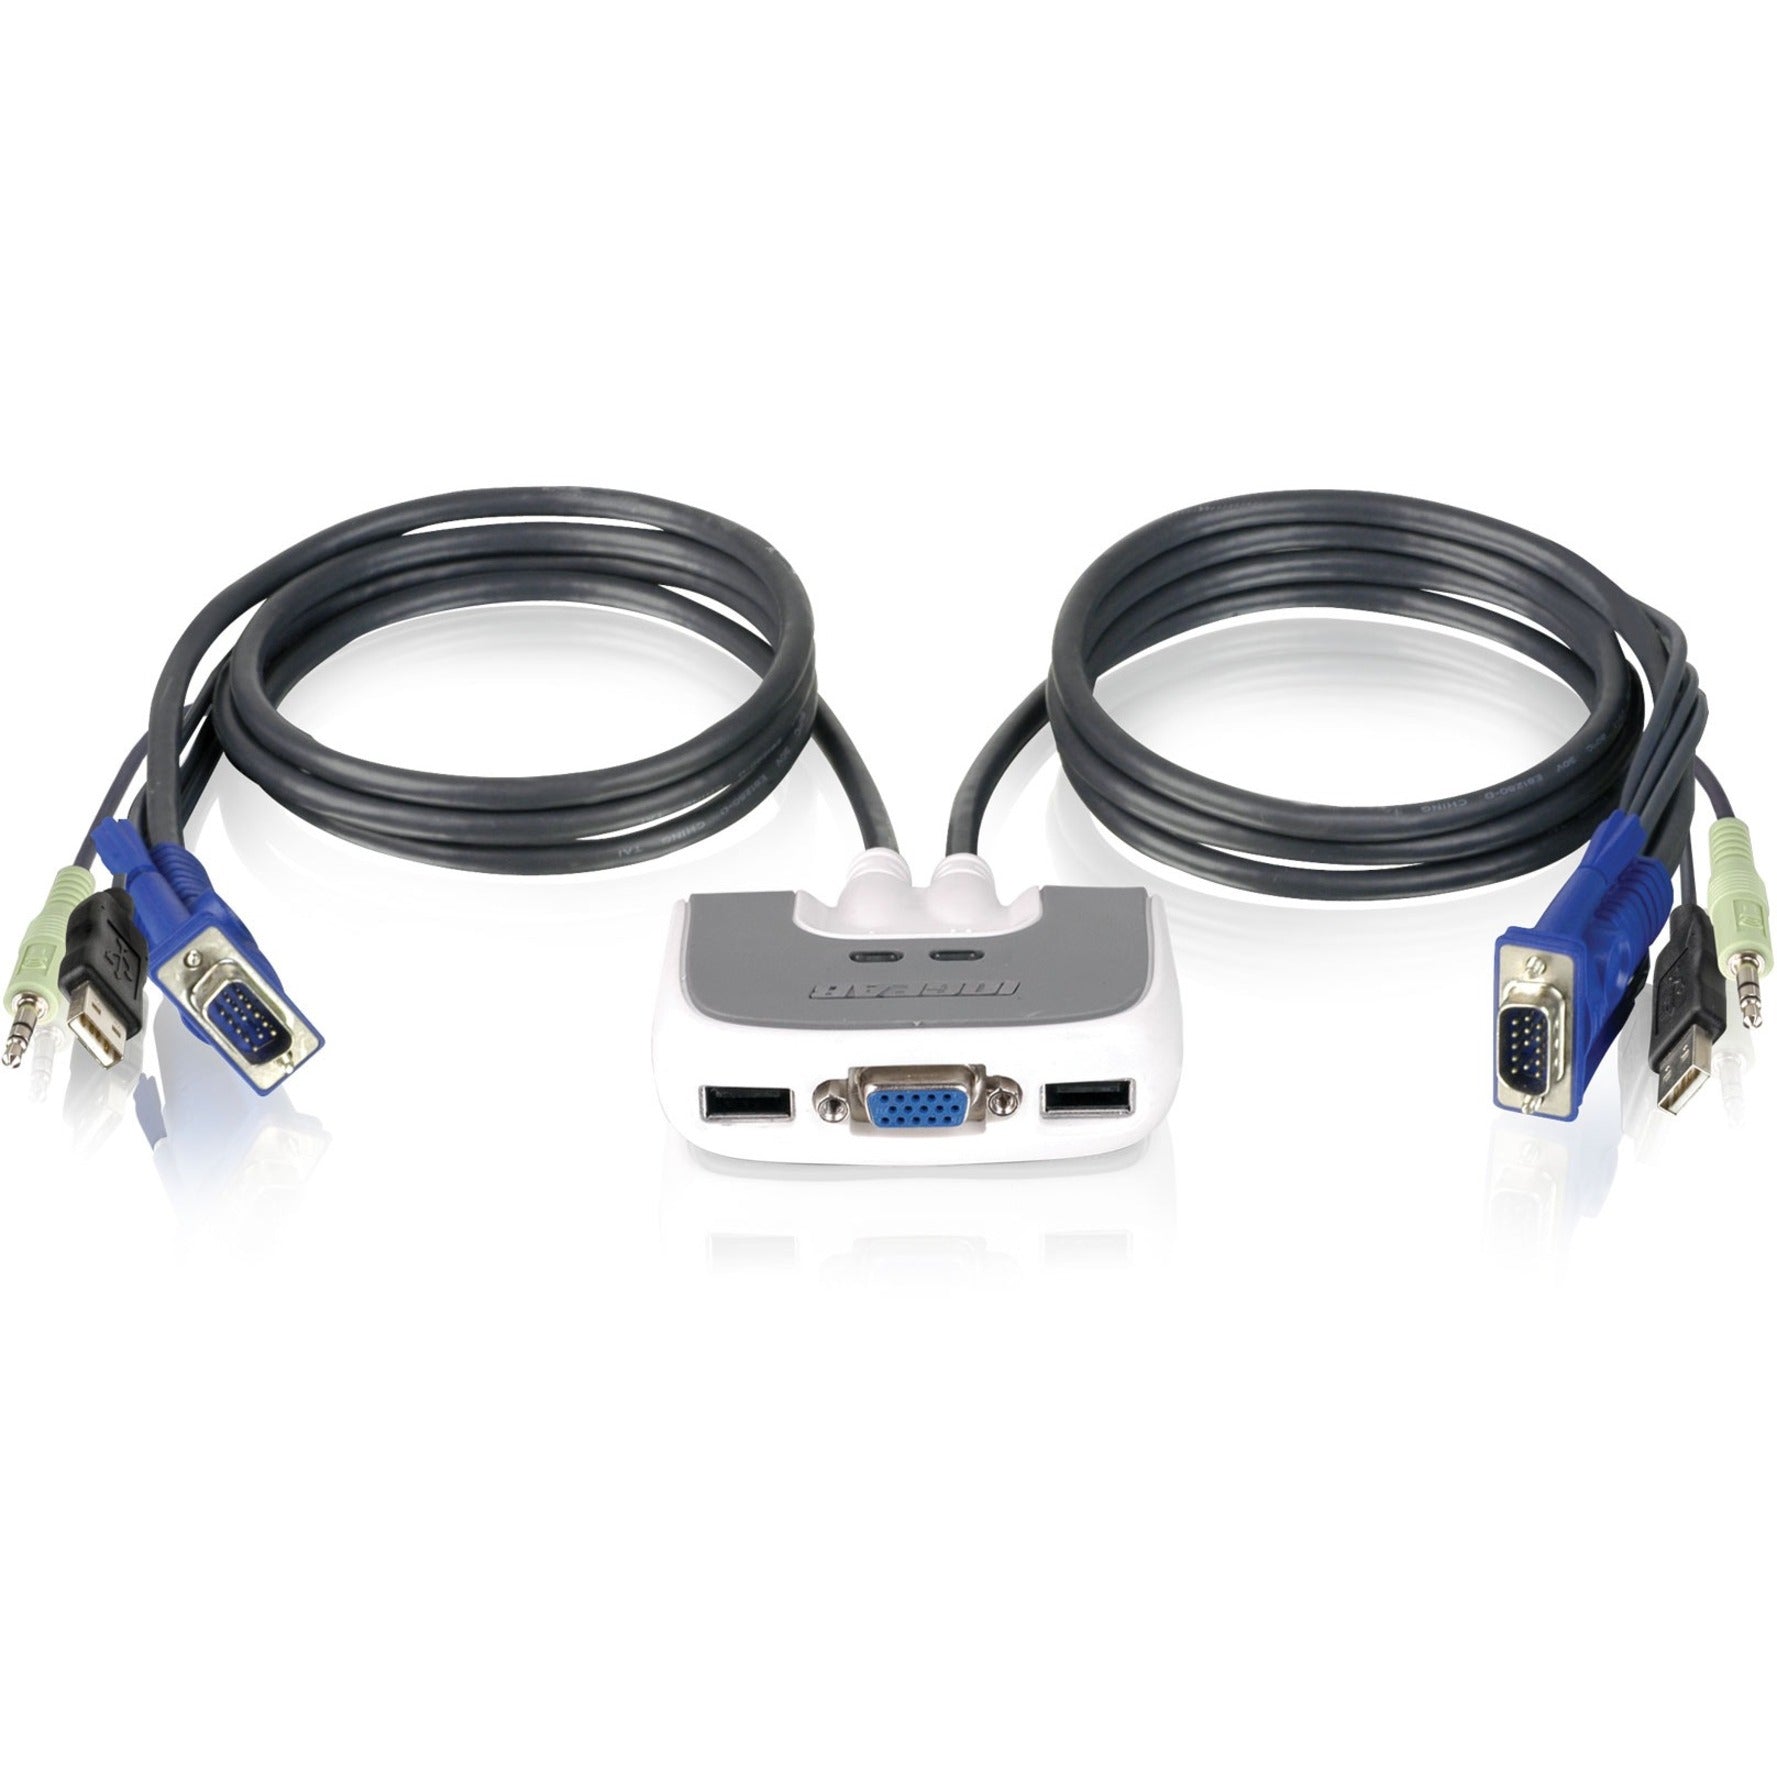 IOGEAR GCS632U MiniView 2-Port USB KVM Switch with Audio and Built-in Cables, VGA, Plug-n-Play, Hot Key Selection